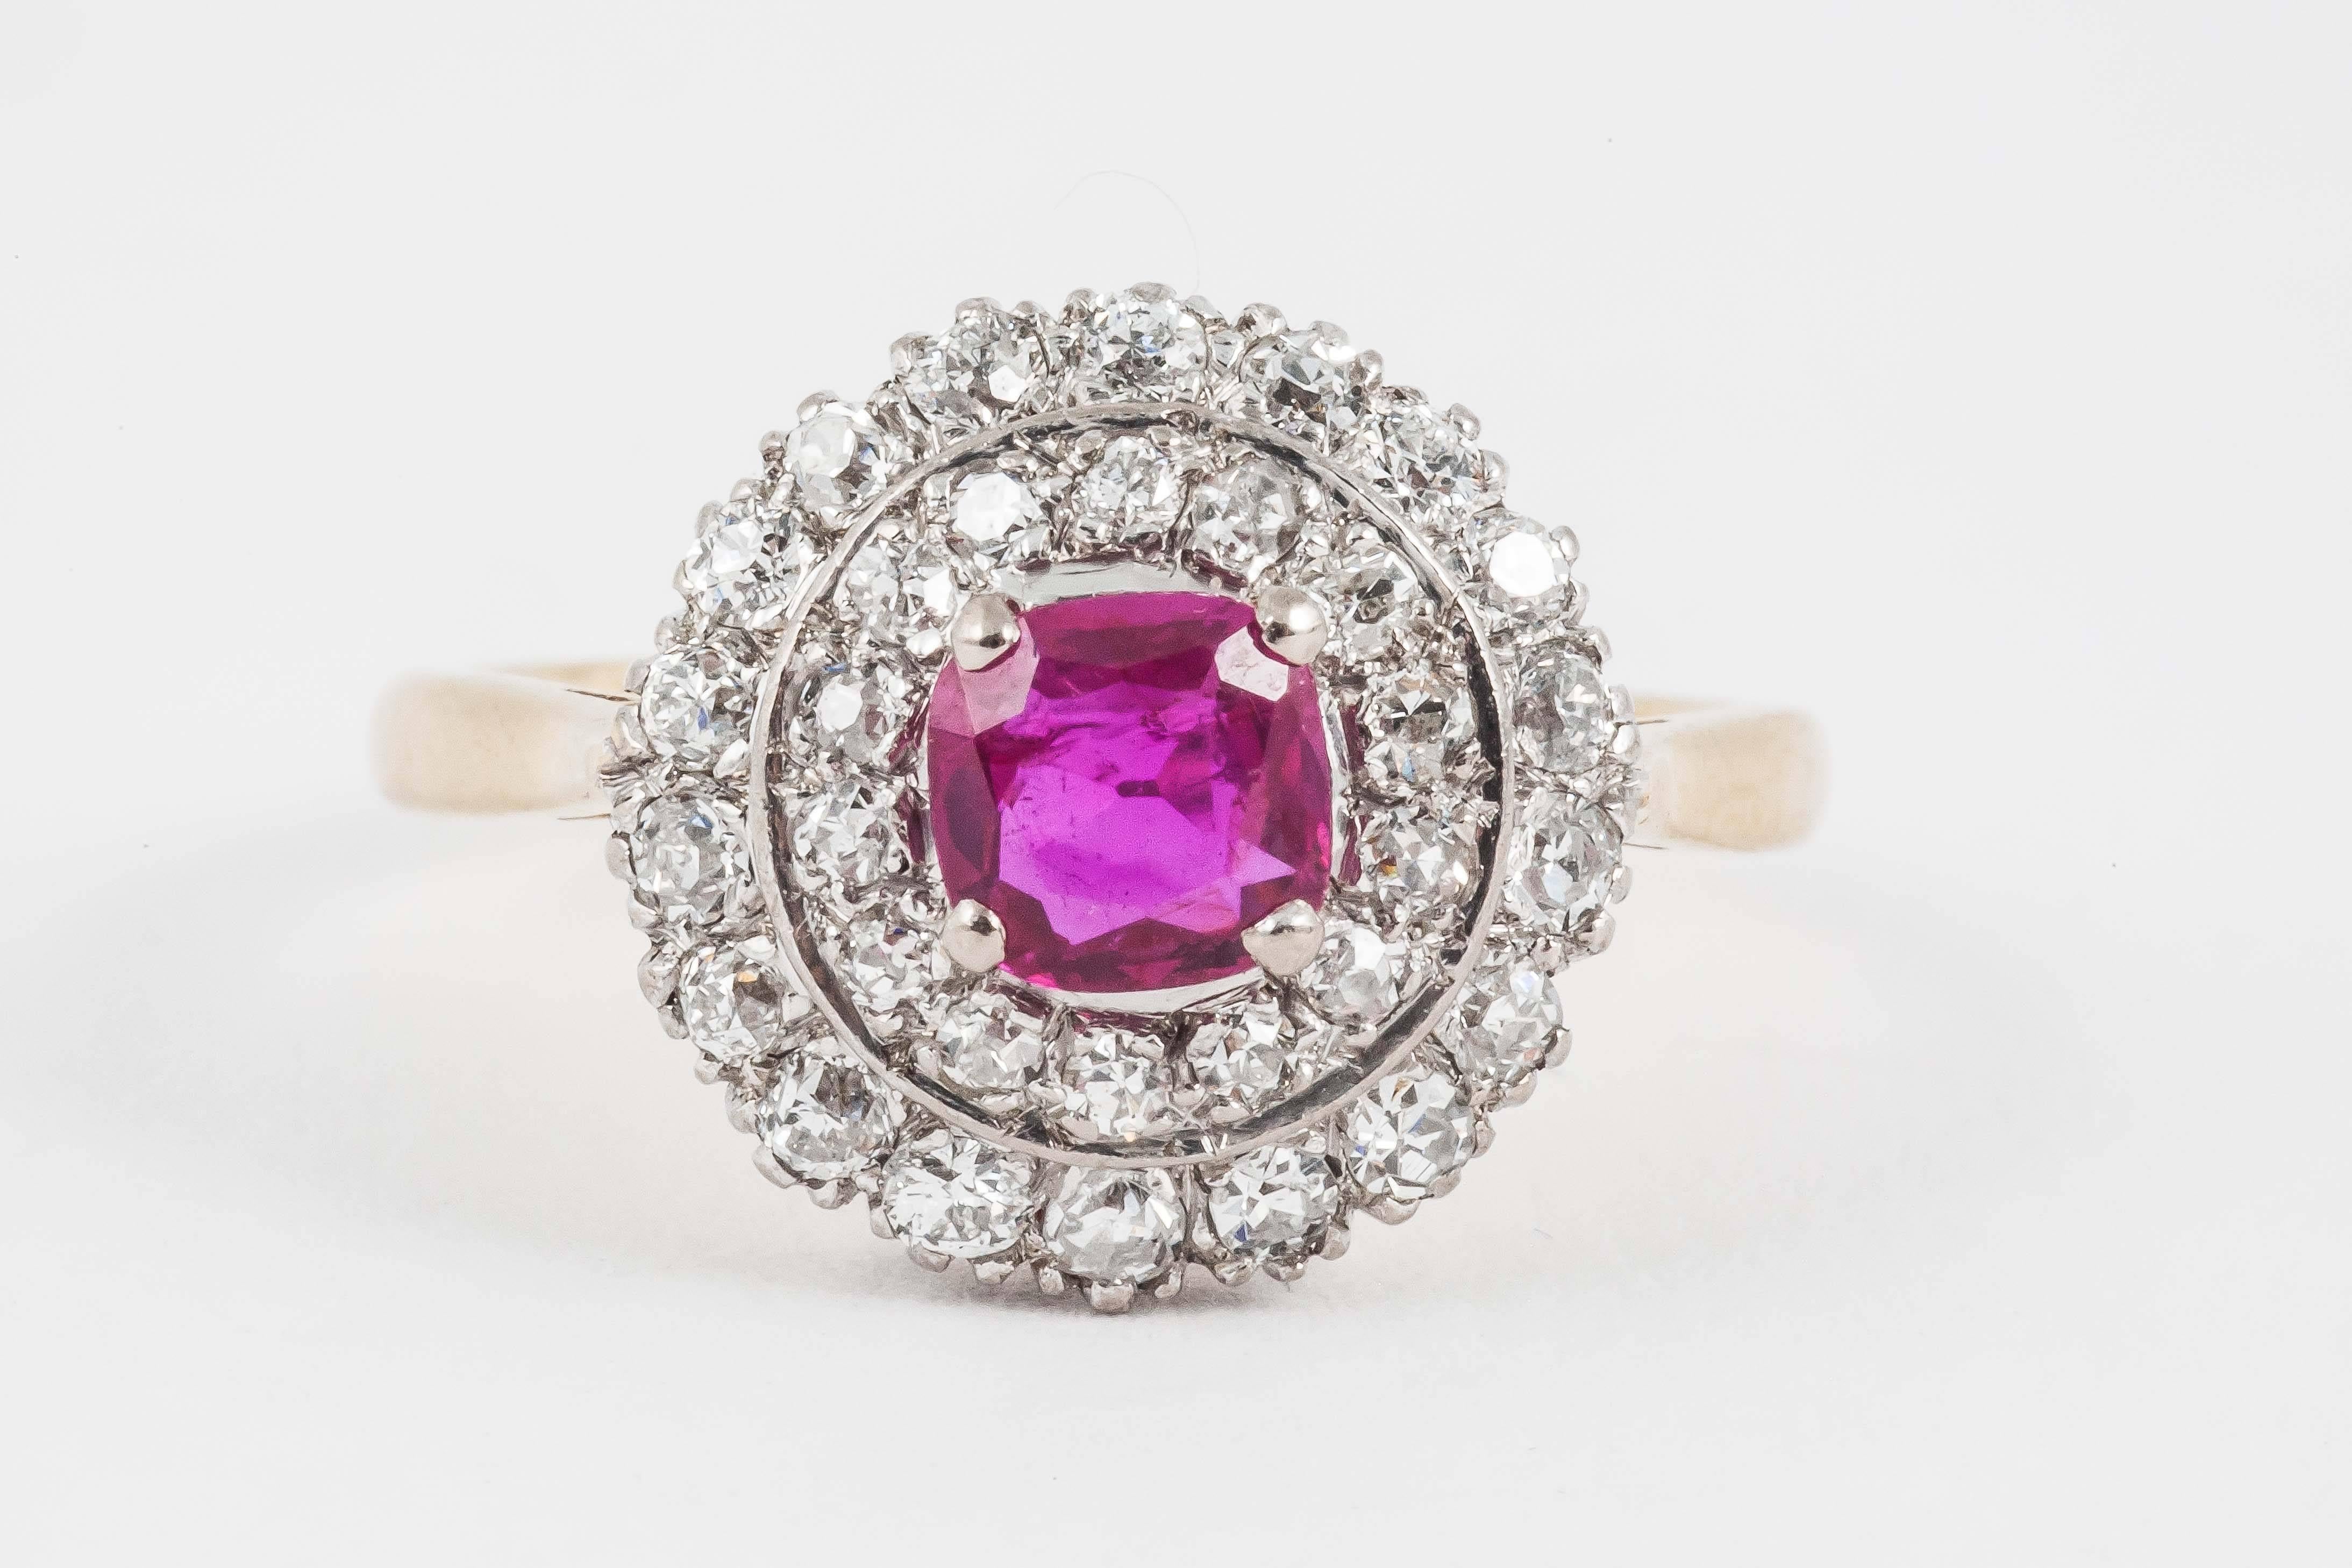 A circular shaped 1950's vintage cluster ring with central Burma ruby surrounded by two rows of brilliant cut diamonds set in 18 carat white gold and mounted in 18 carat yellow gold.
Ring size 8.5 USA, Uk size Q.
1950's Vintage piece in the